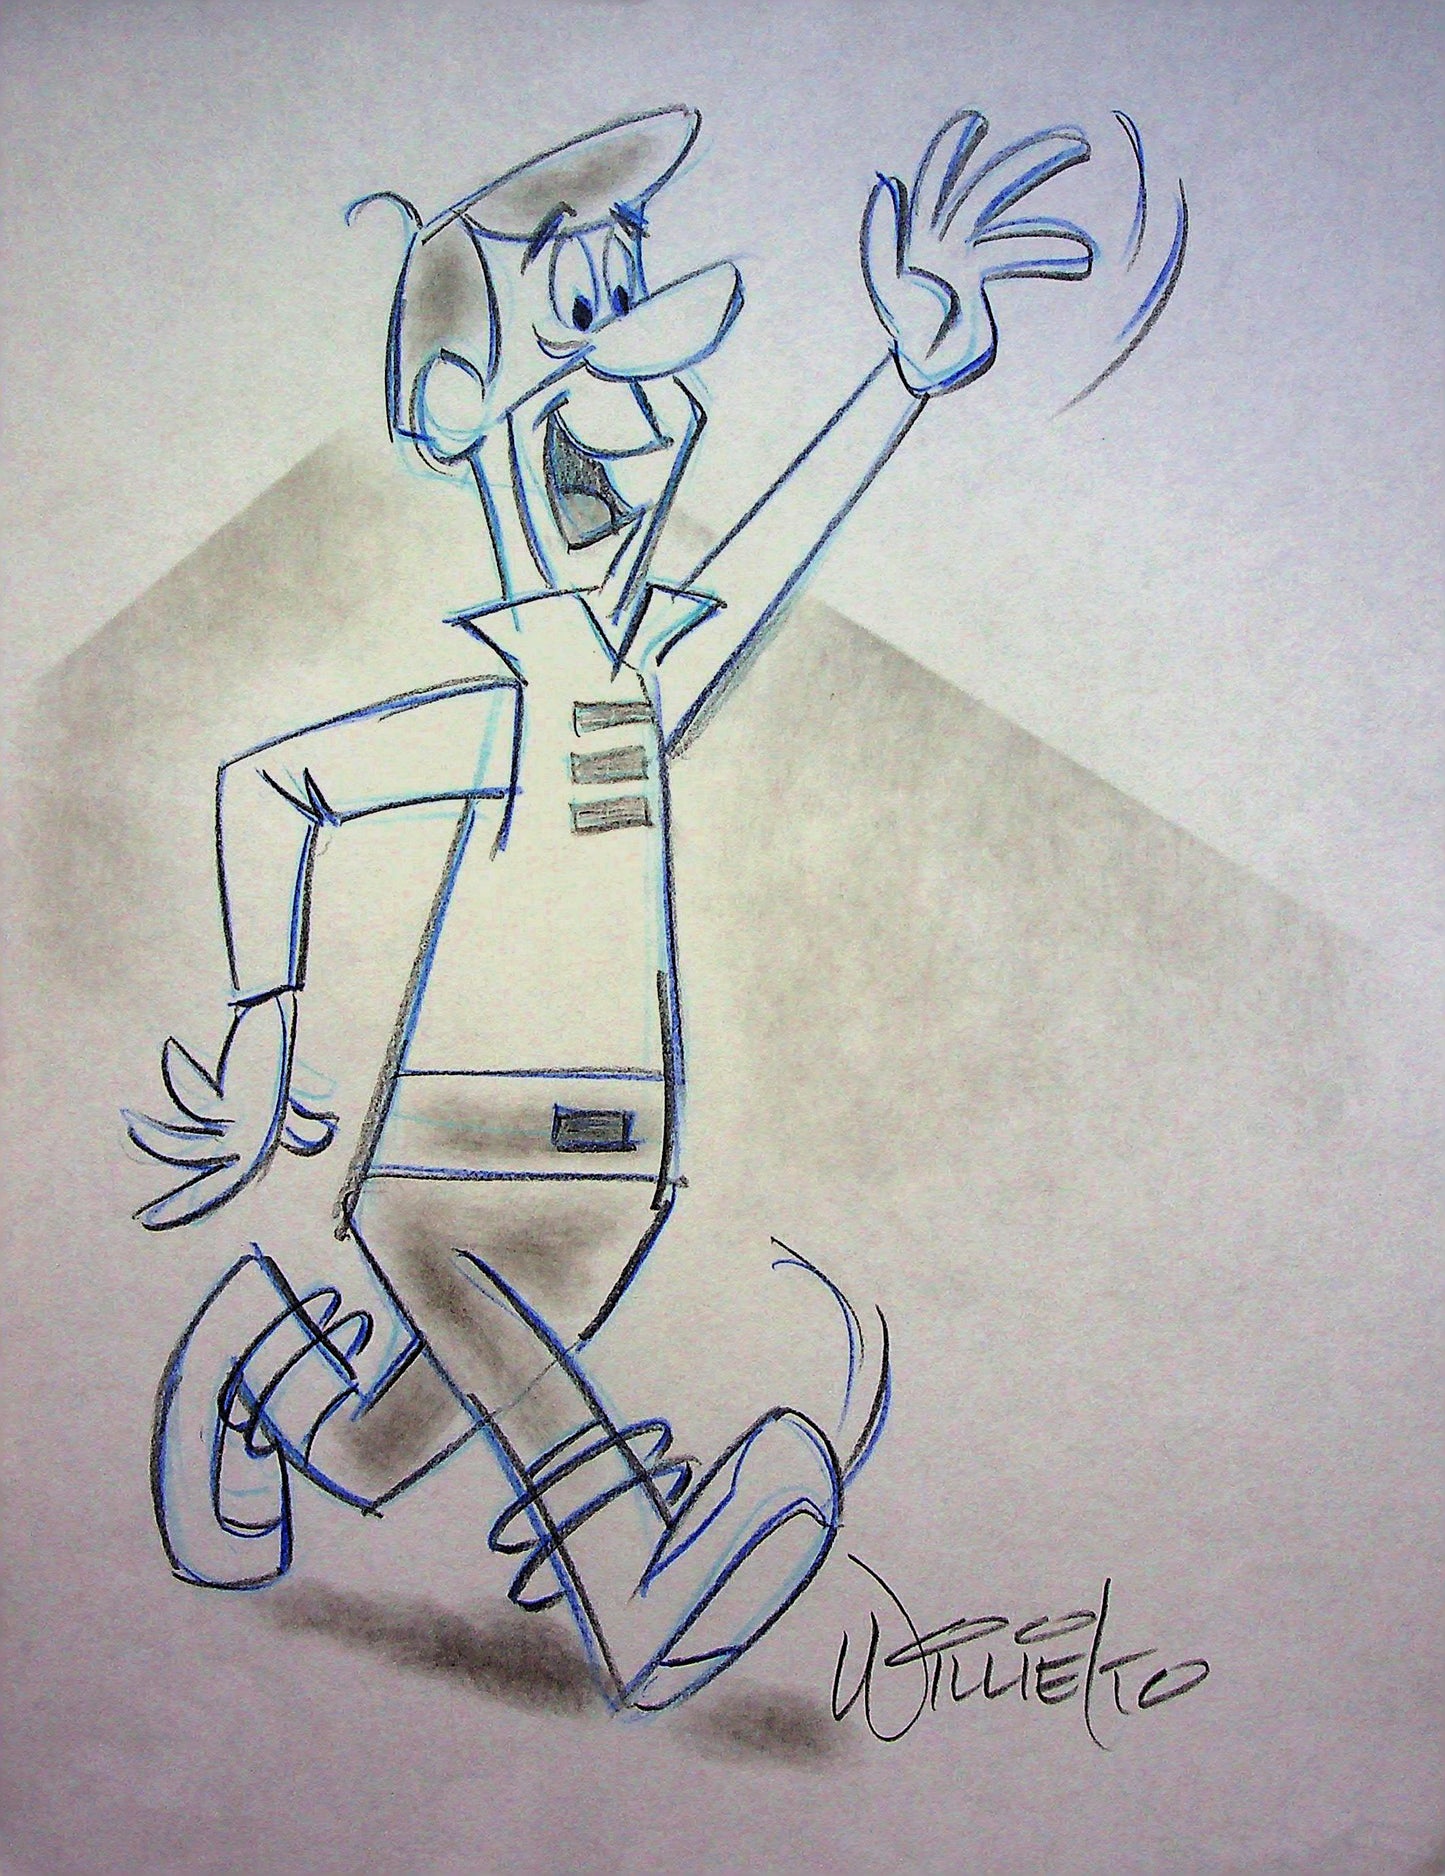 GEORGE JETSON Willie Ito Signed Hand Drawn Pencil Animation Art 8"x11"